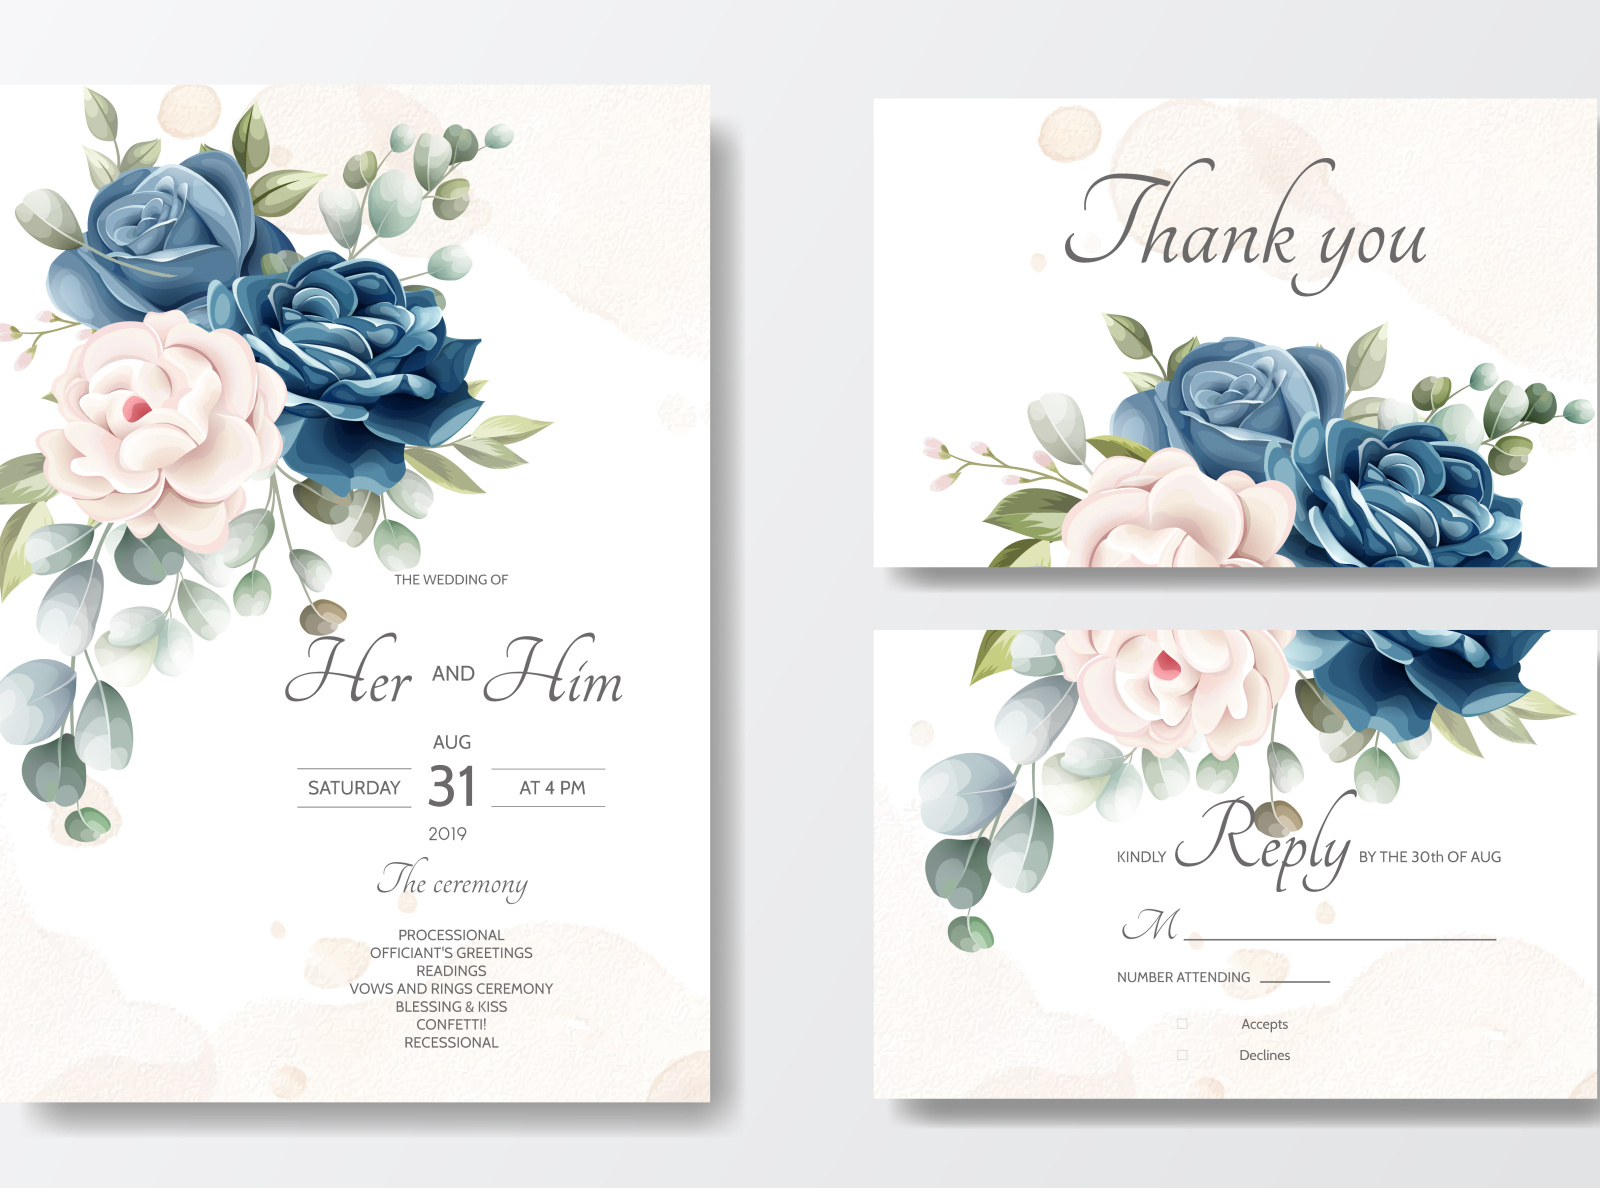 Beautiful Floral Wreath Wedding Invitation Card Template By Dino Mikael On Dribbble